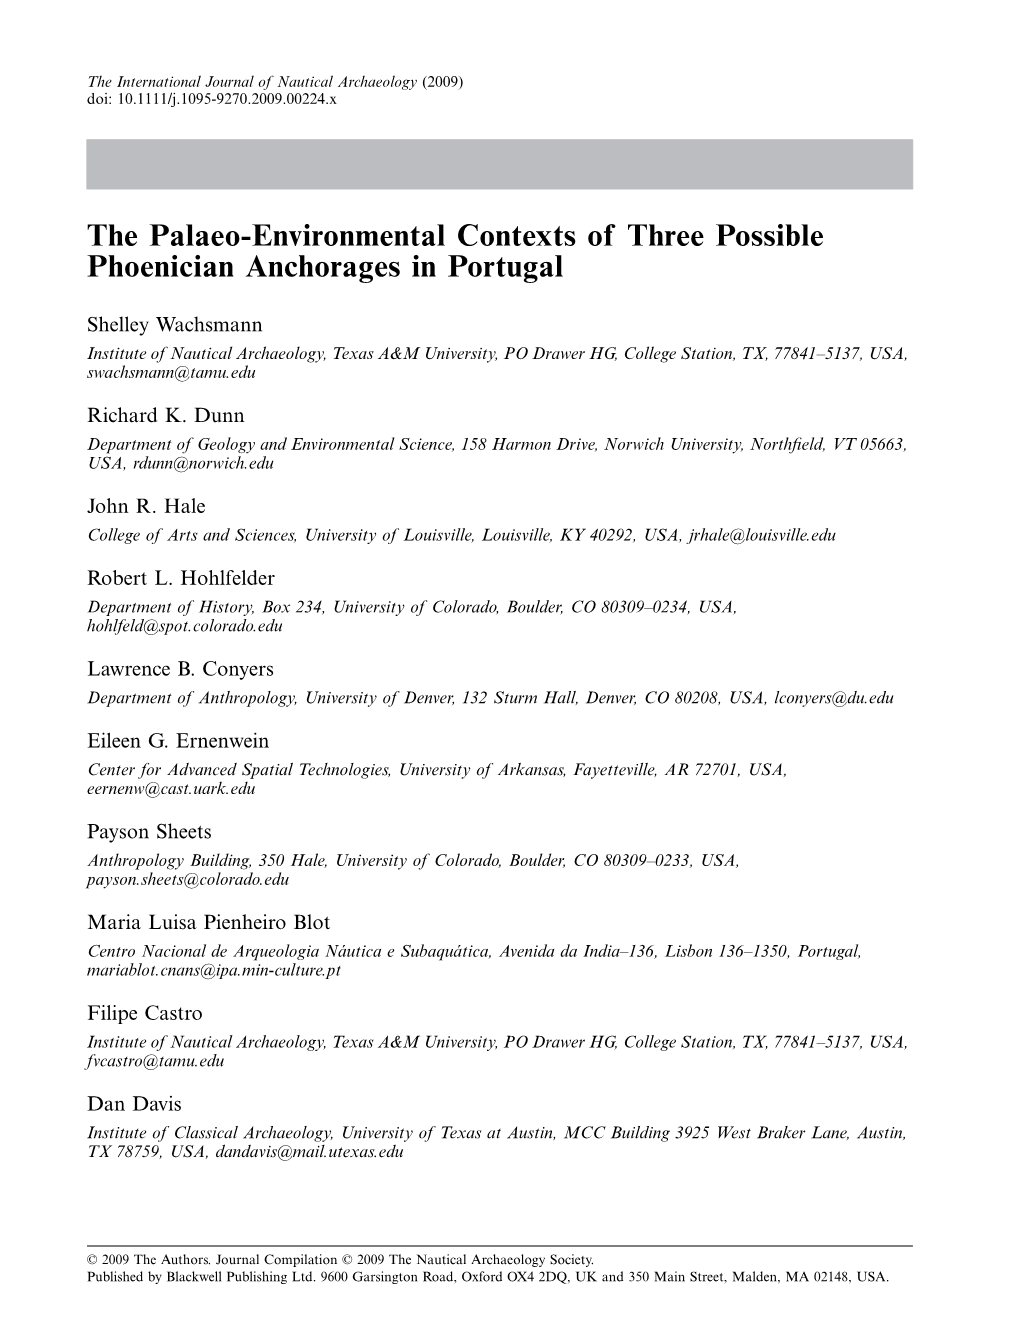 The Palaeo-Environmental Contexts of Three Possible Phoenician